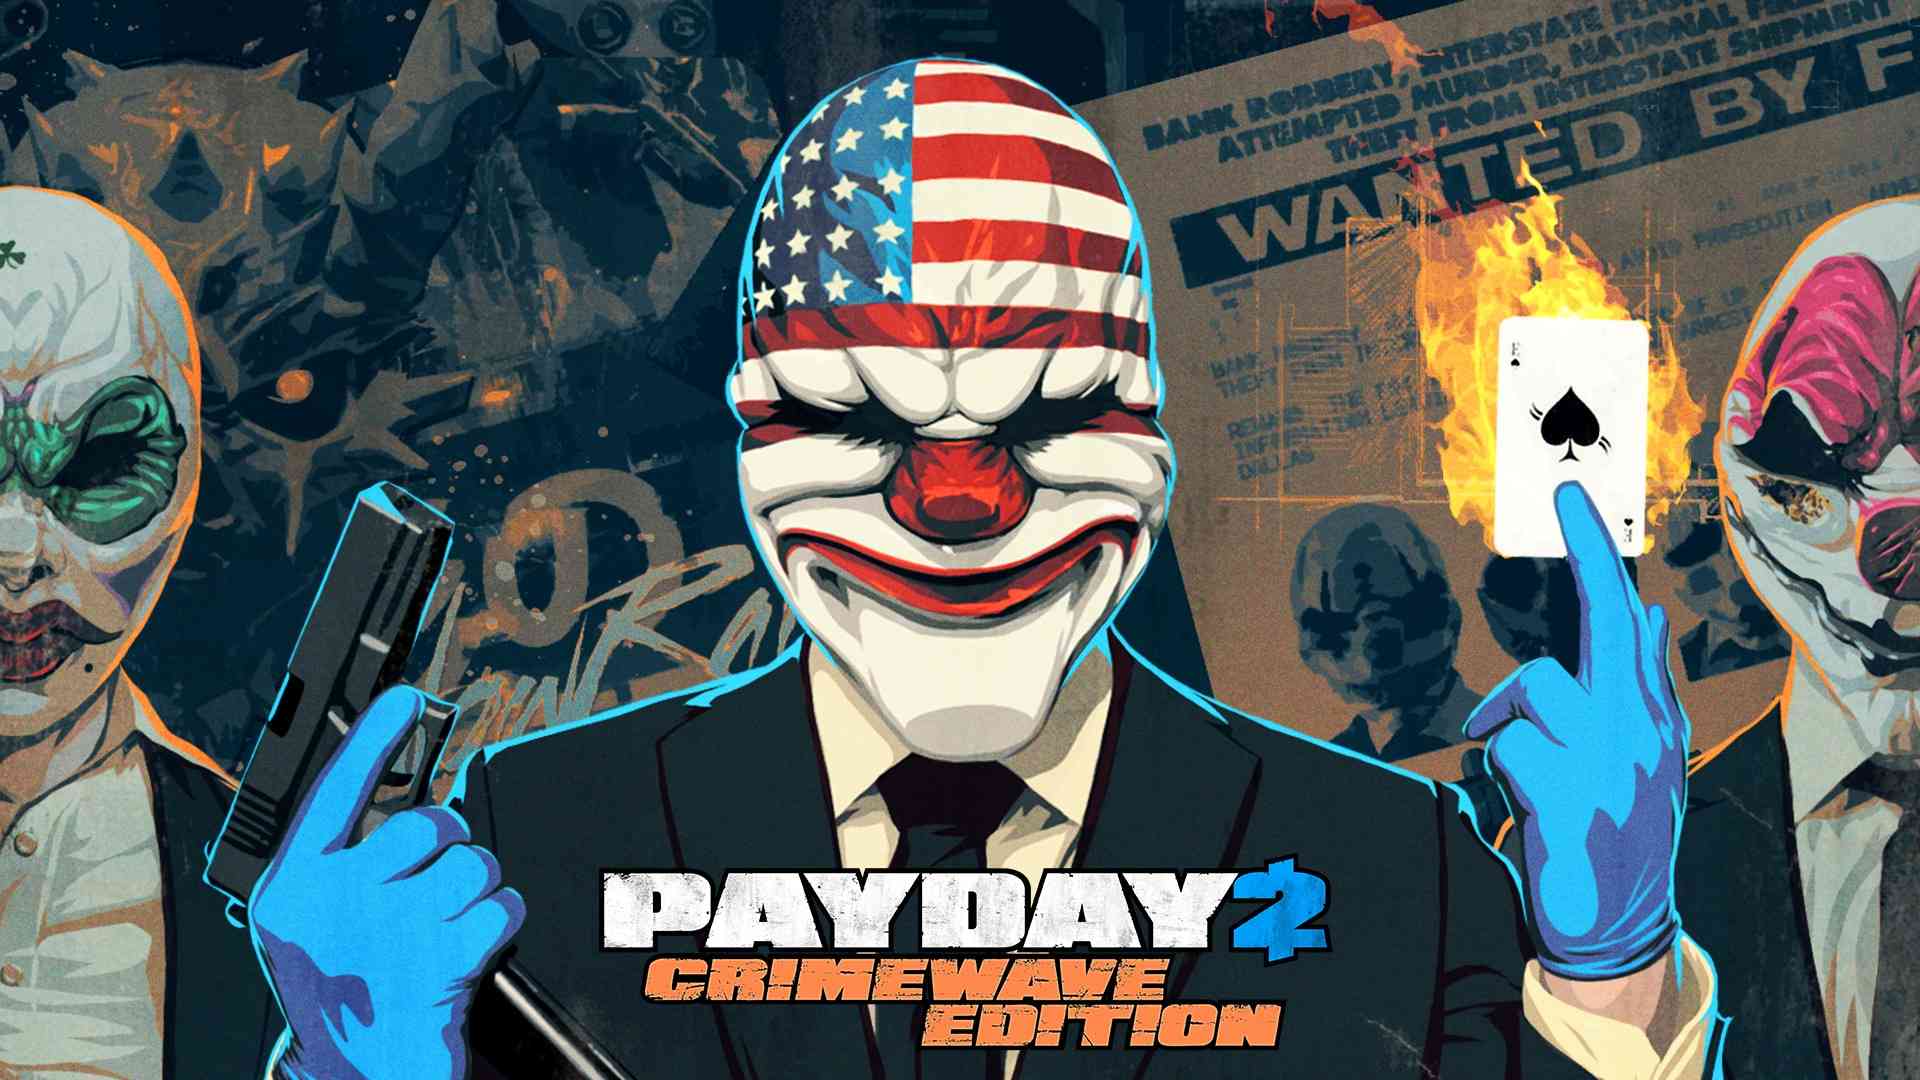 Payday 2 Crimewave Edition Review Unpolished, Yet Retains Some